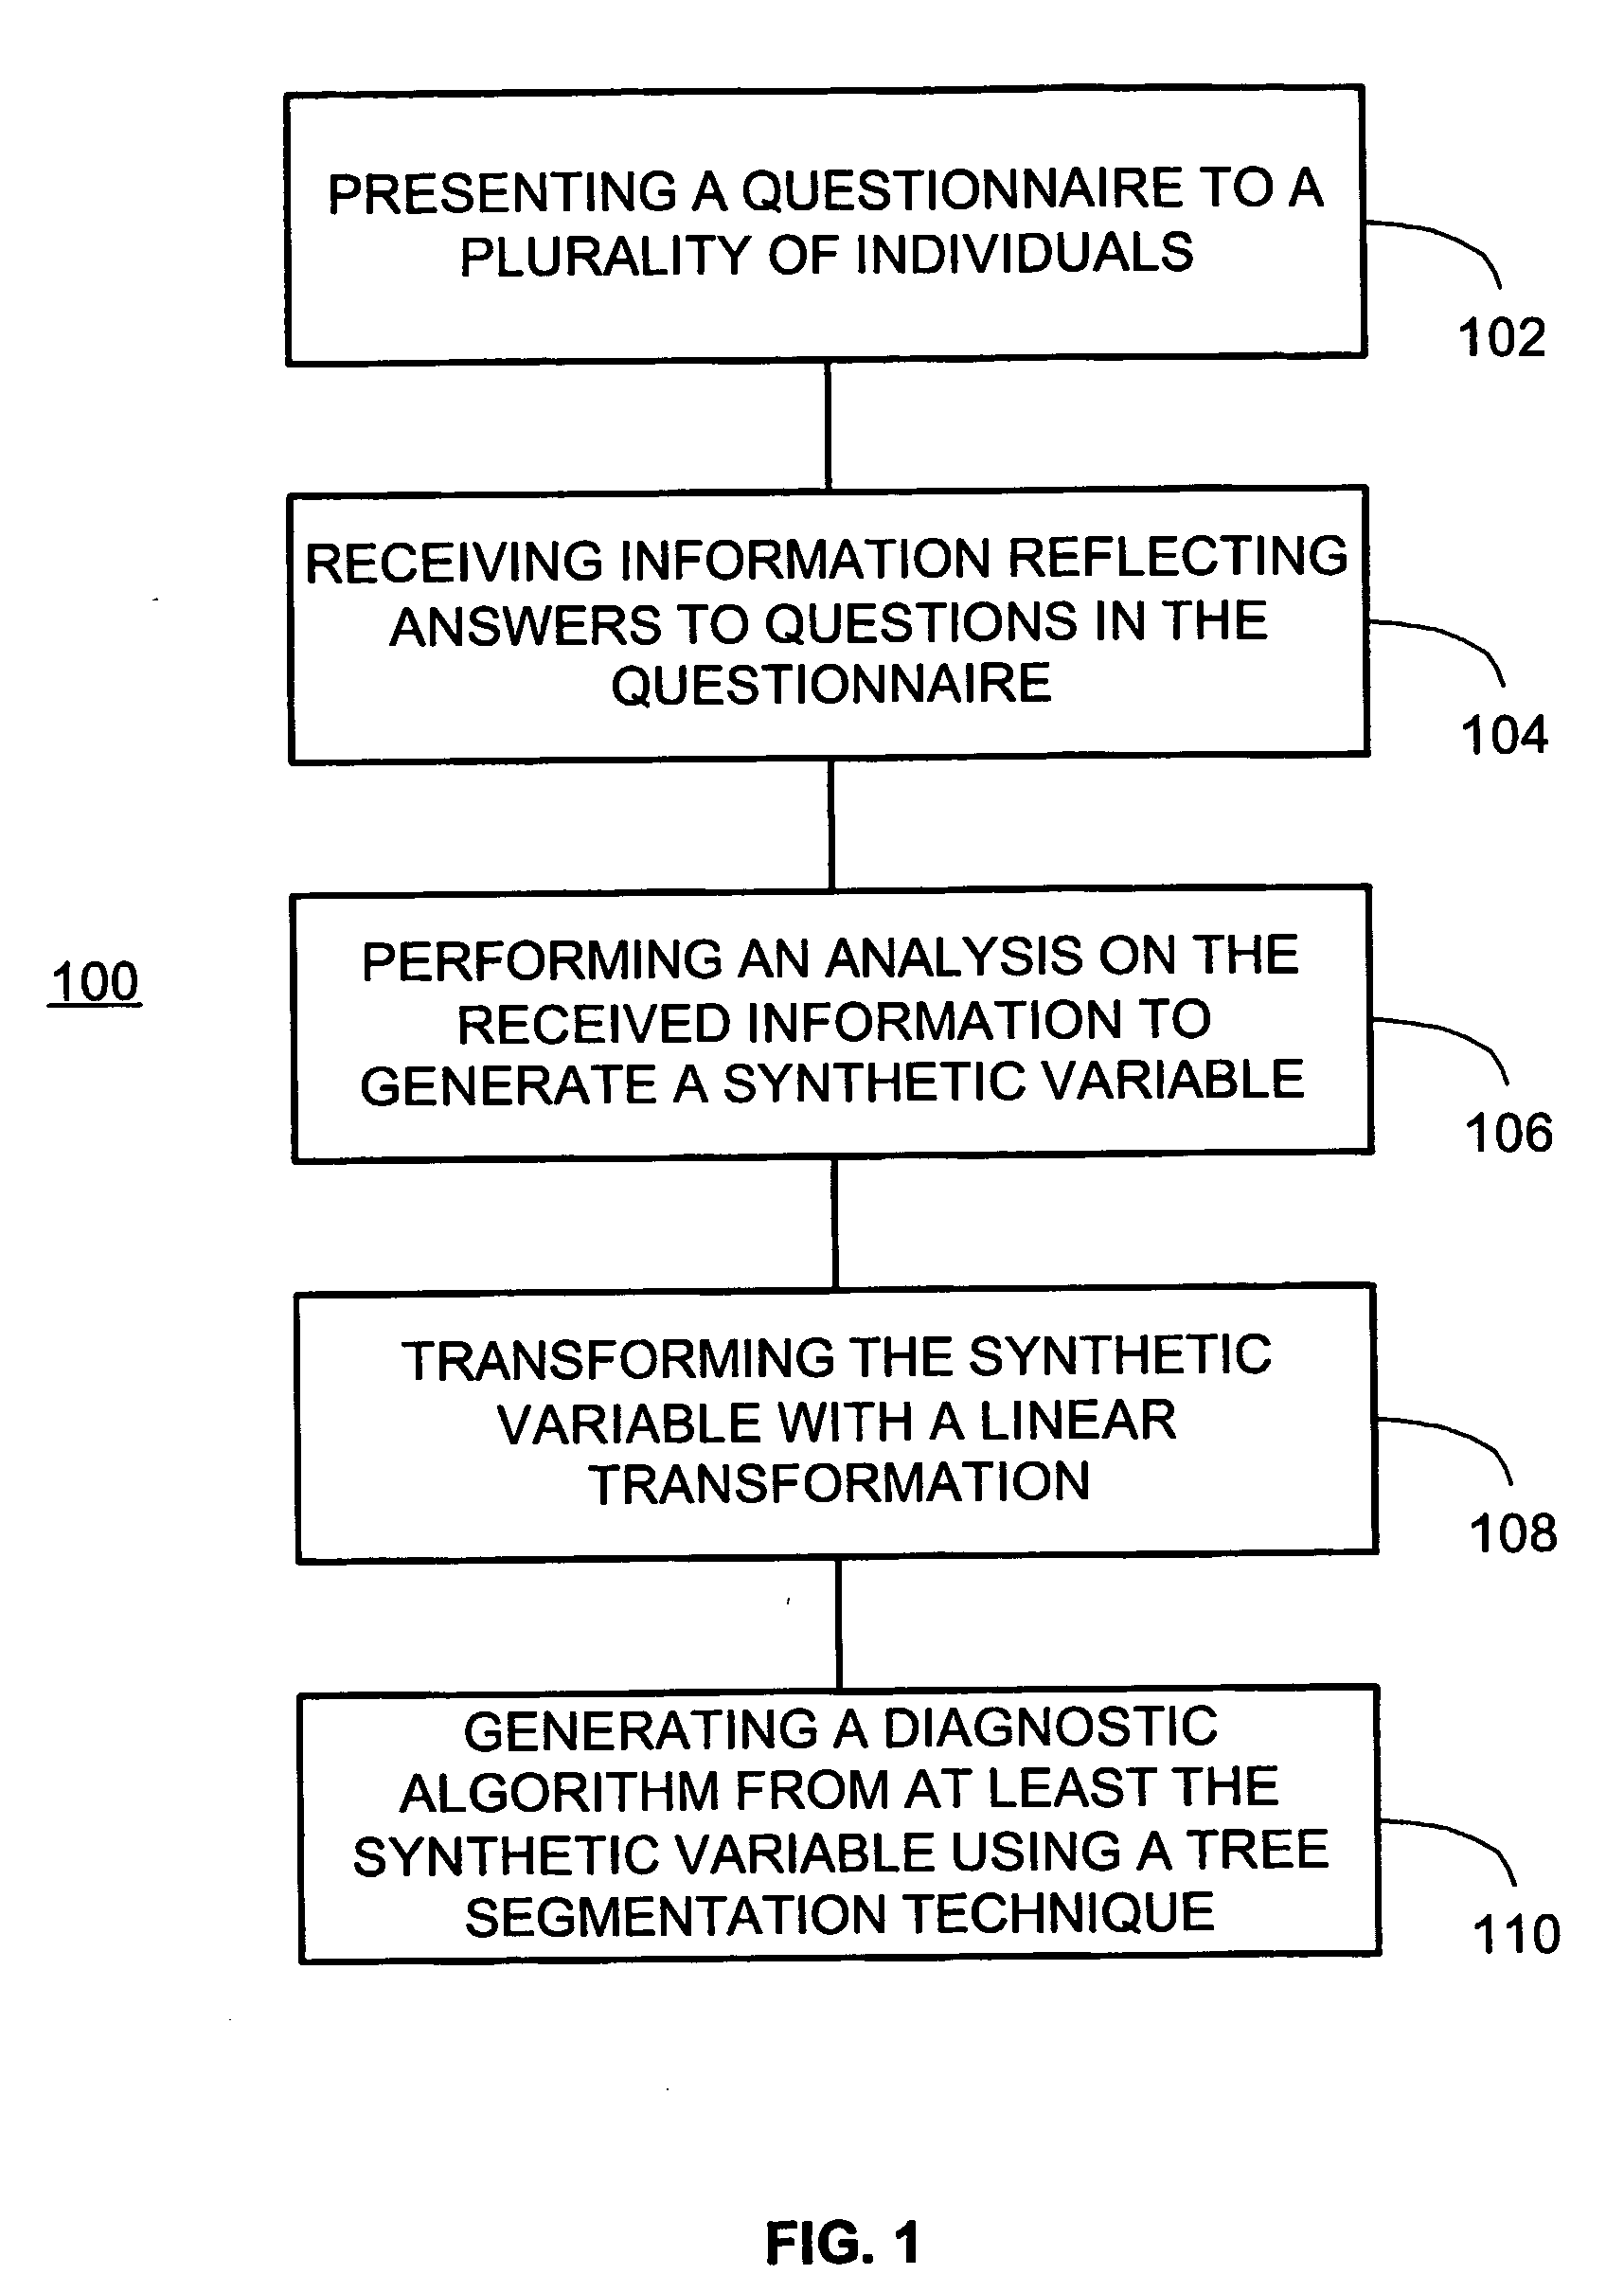 Methods and systems for generating diagnostic algorithms based on questionnaires